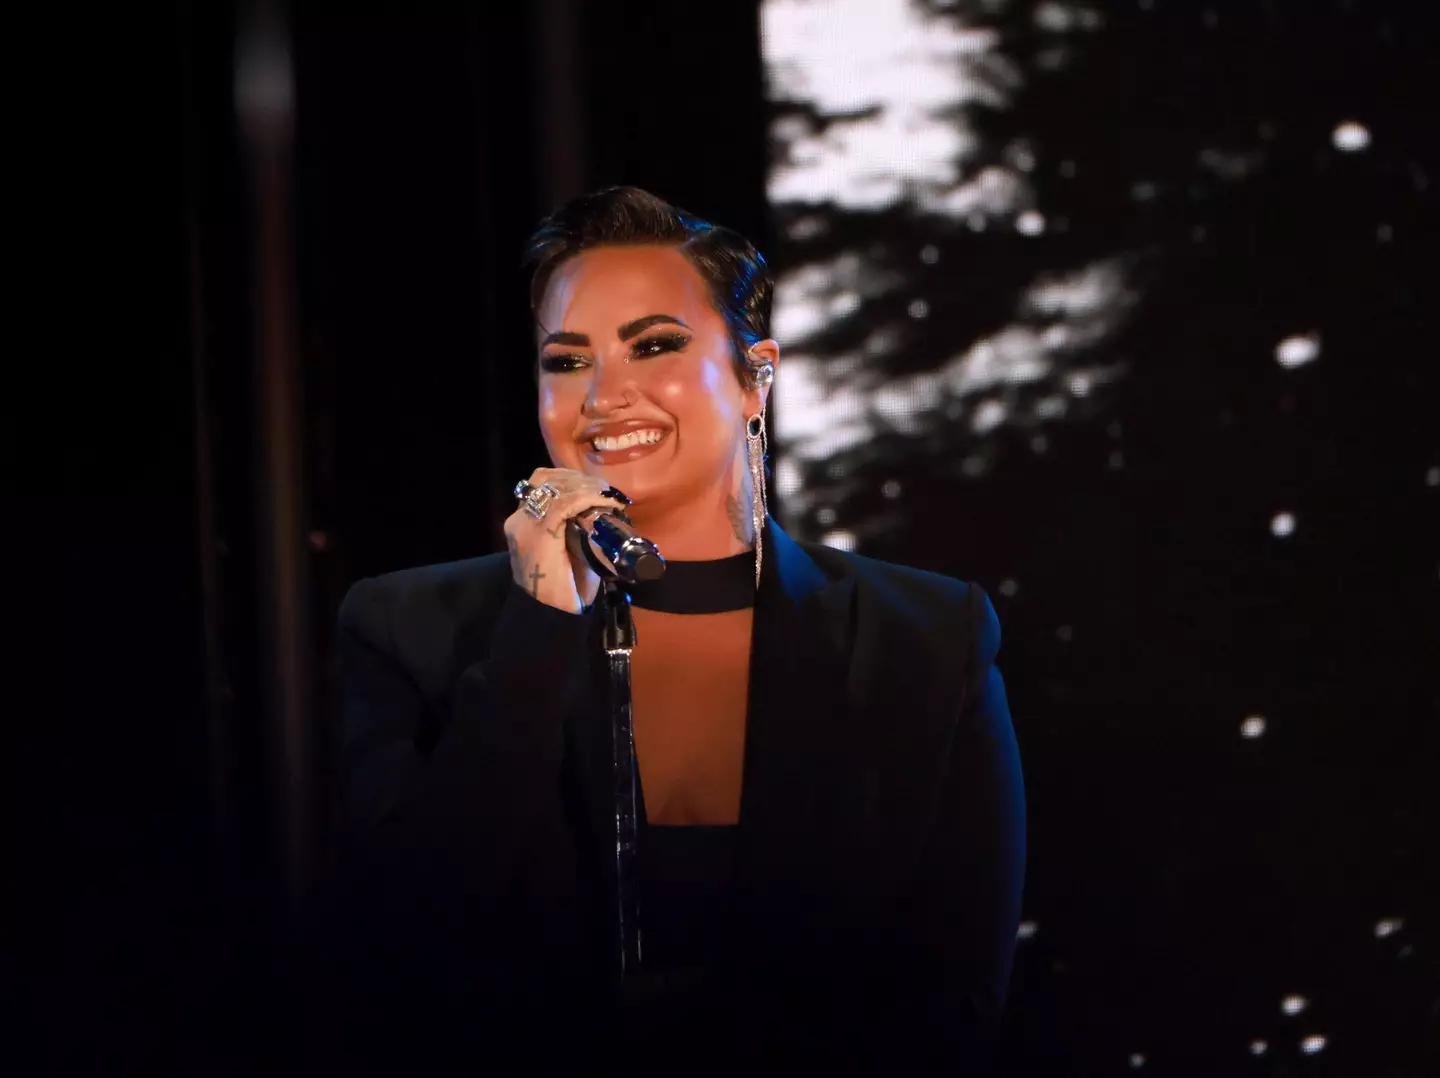 Lovato is now using the pronouns she/her.